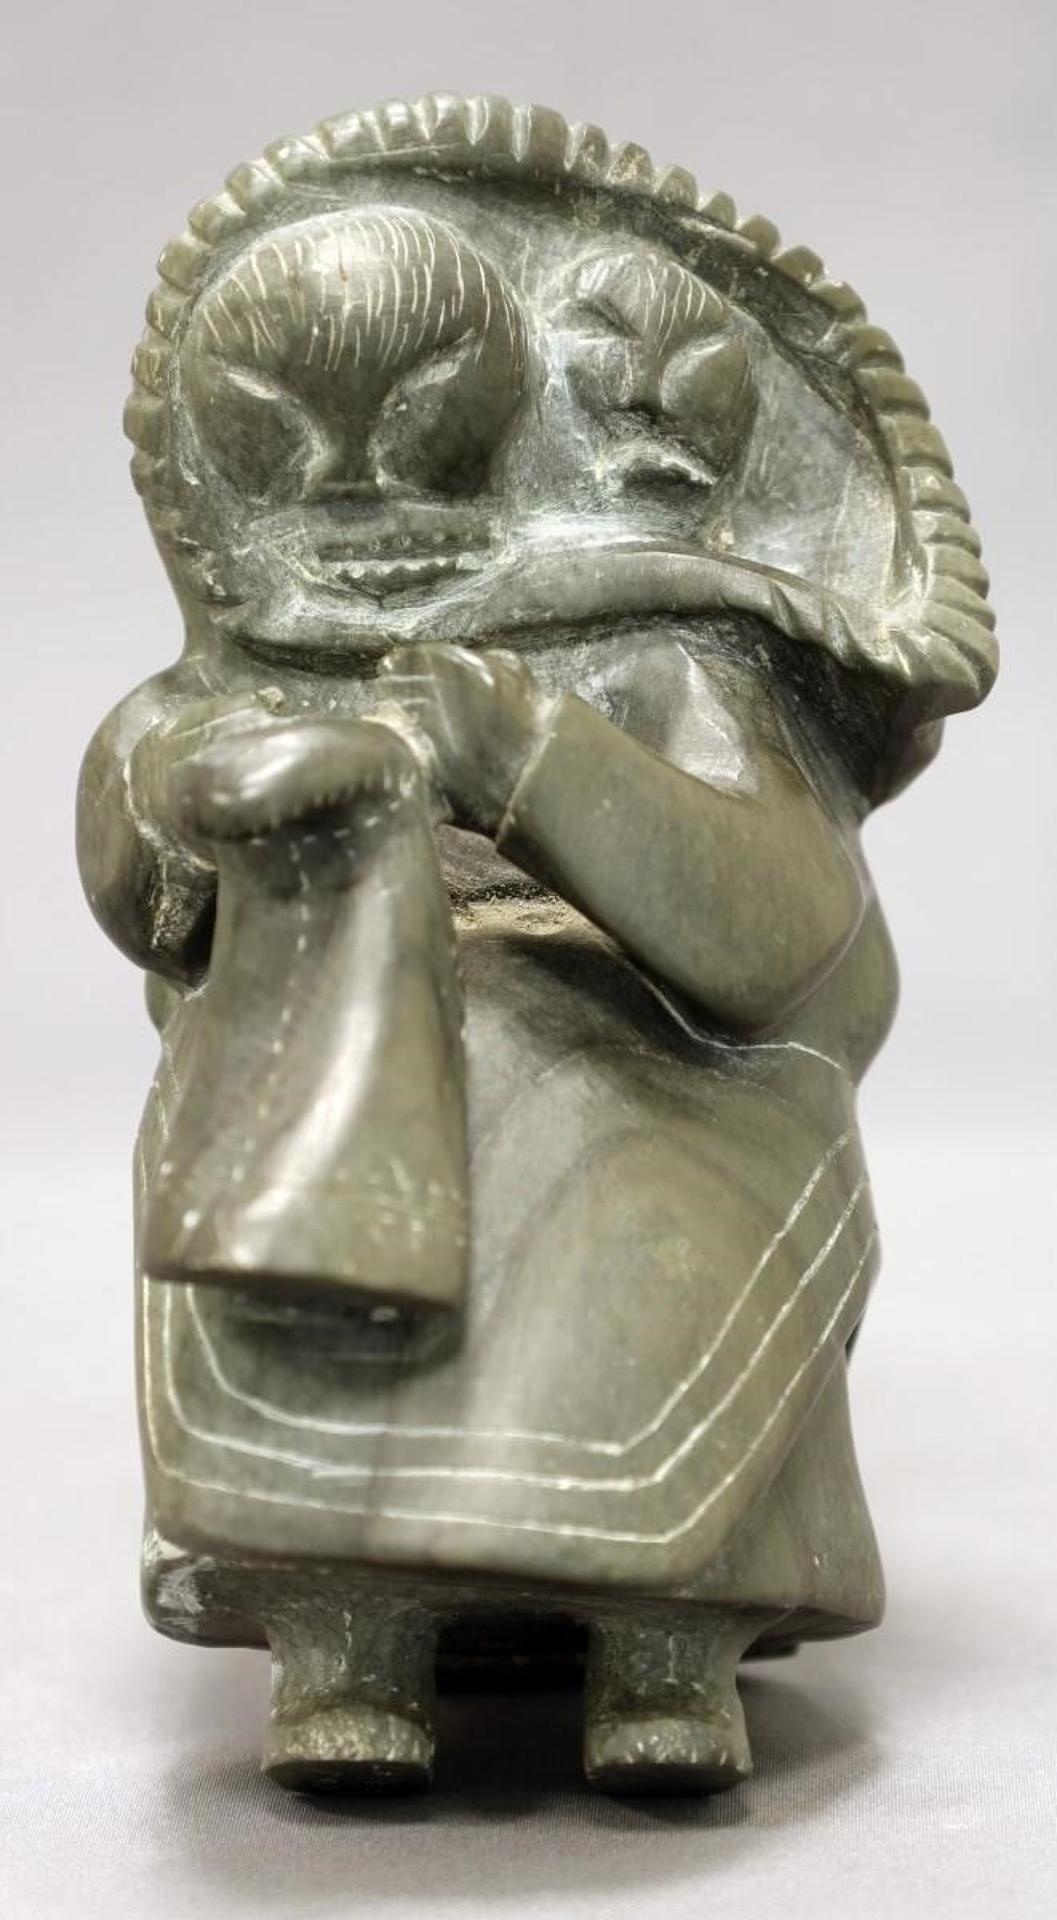 Johnassie Arragutainaq (1935) - light grey-green stone carving of a Woman With Baby in Amaut Making a Mukluk